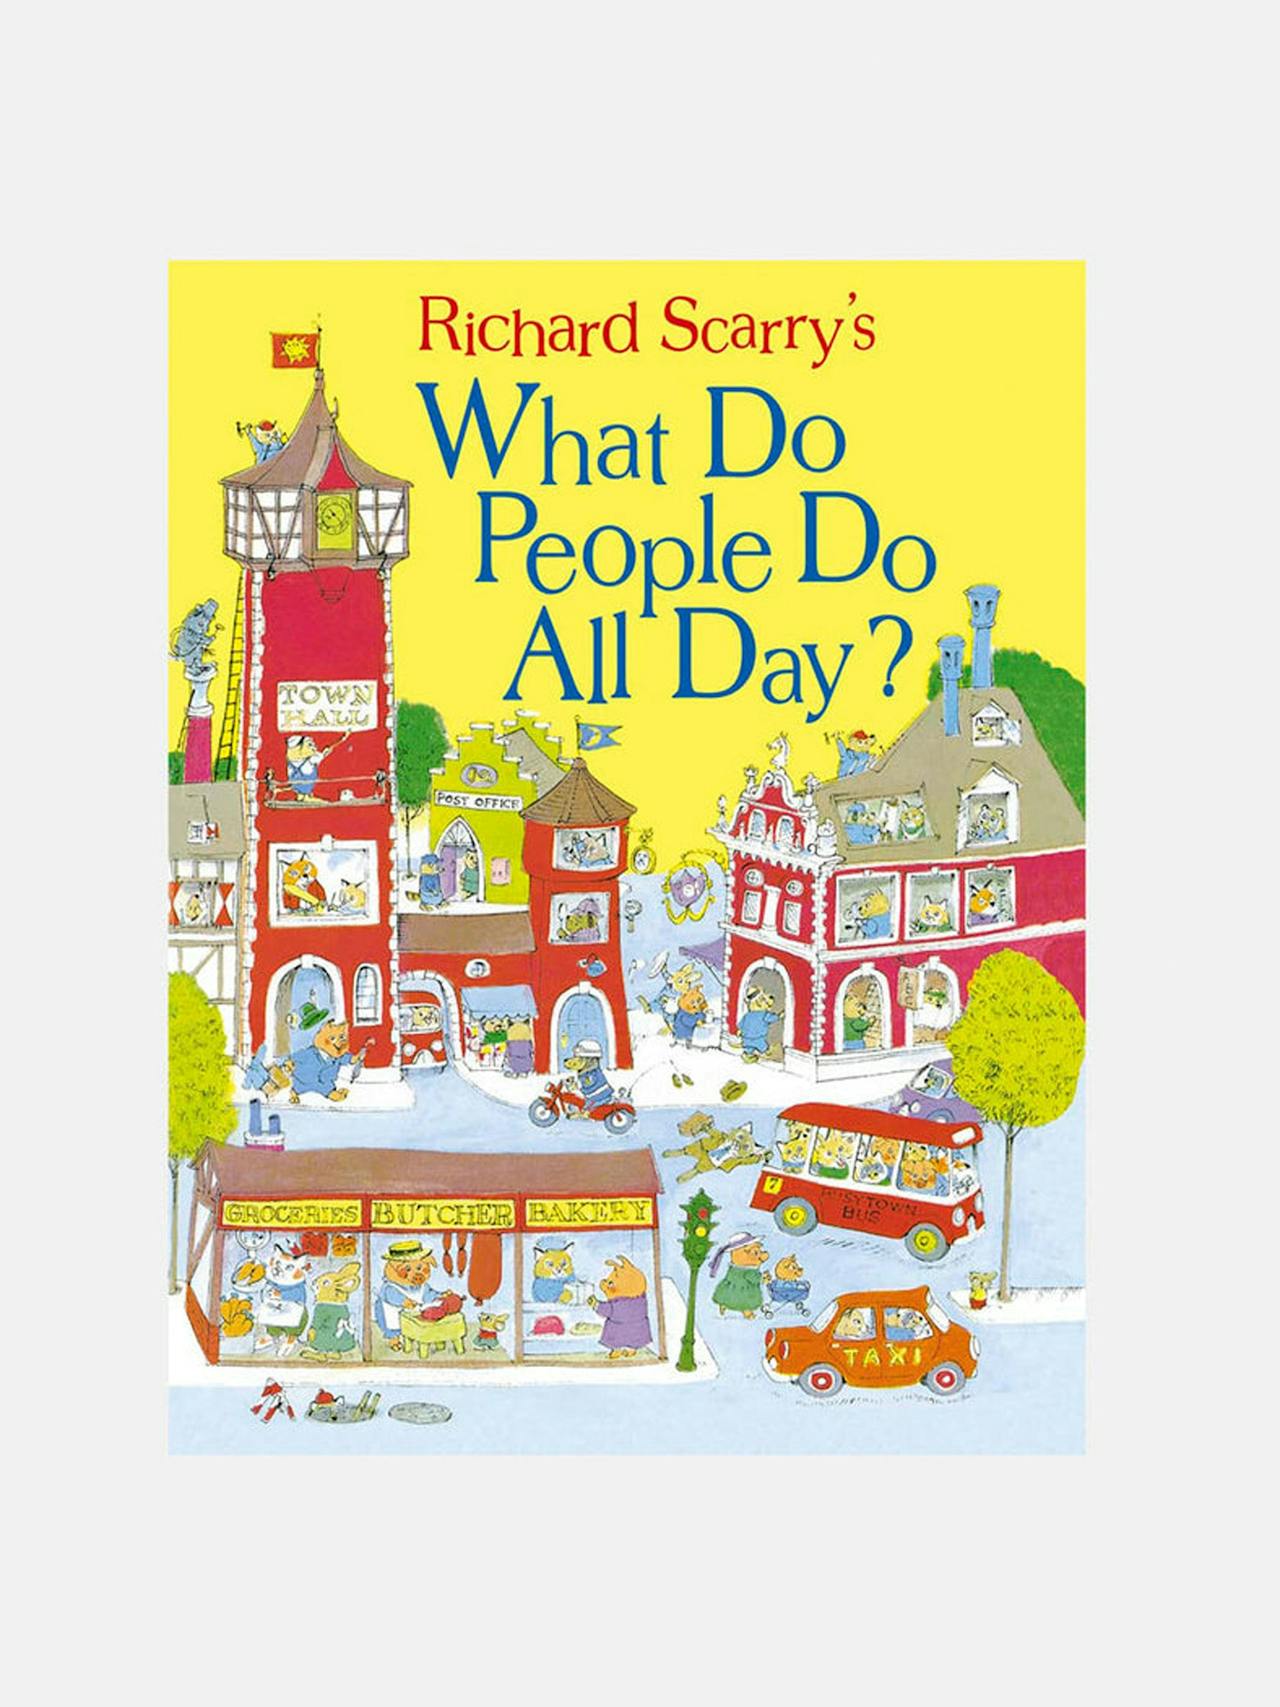 Richard Scarrys What Do People Do All Day